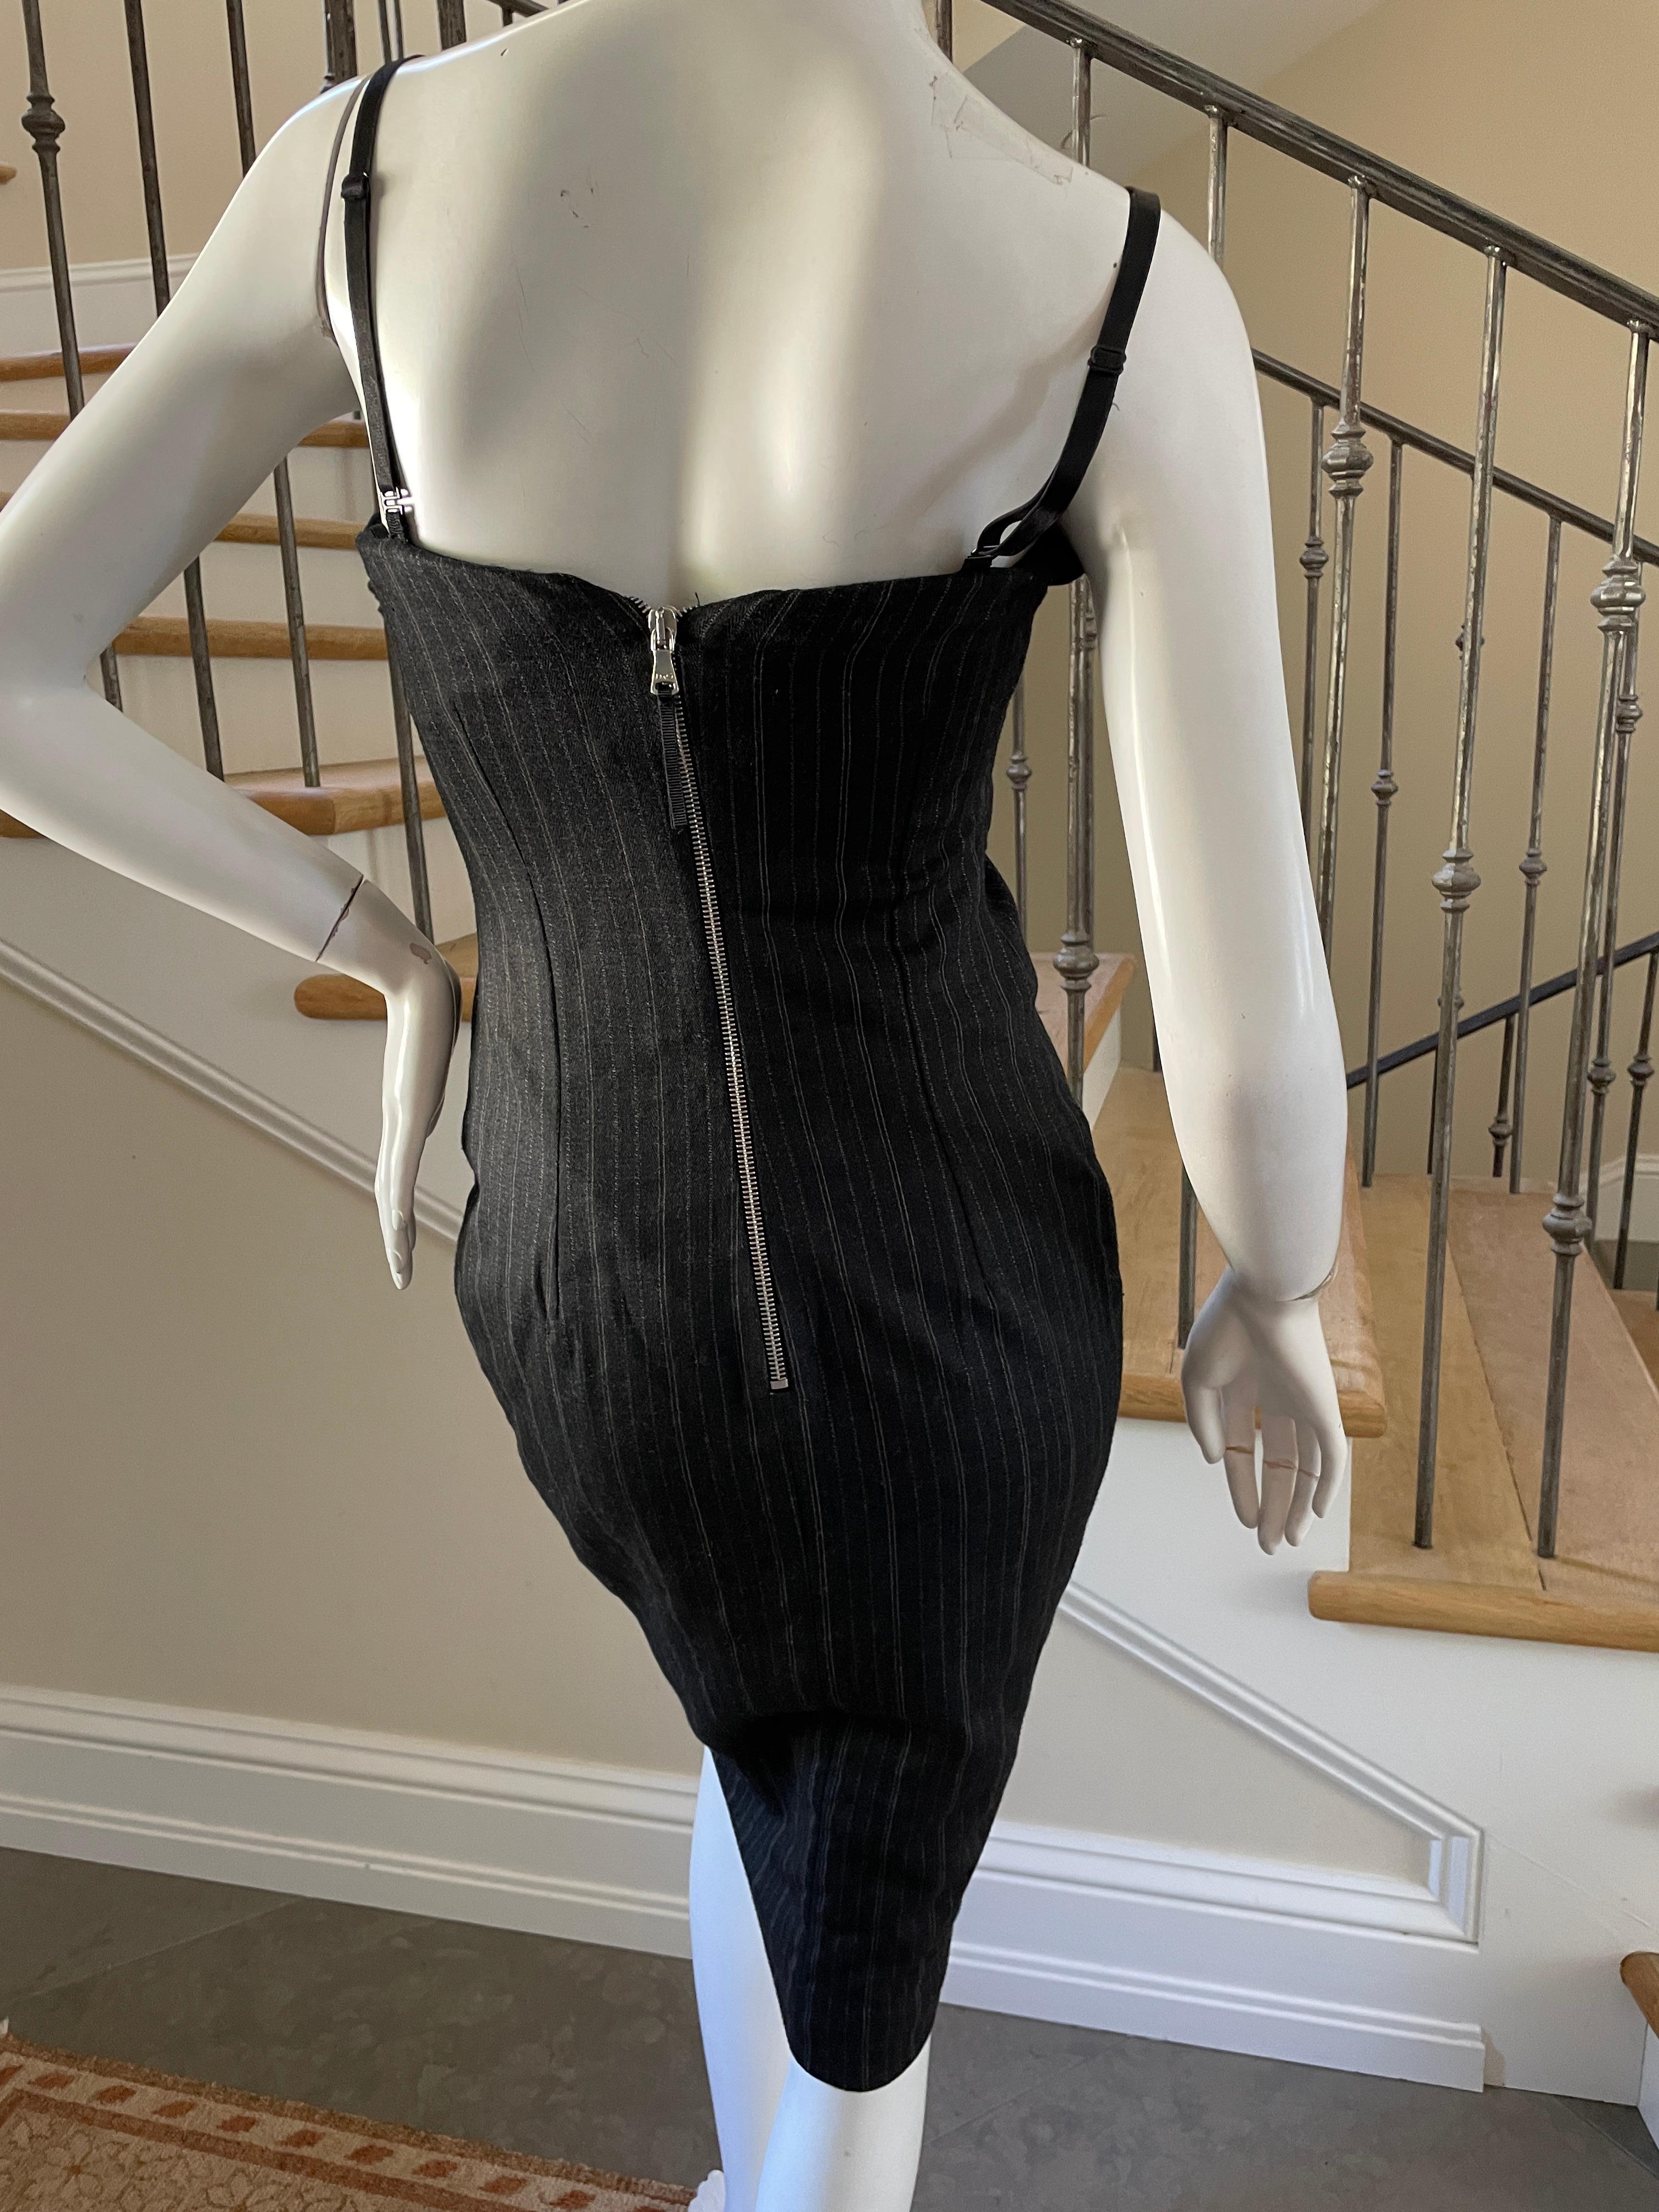 Dolce & Gabbana for D&G Pinstripe Cocktail Dress with Full Inner Corset. For Sale 3